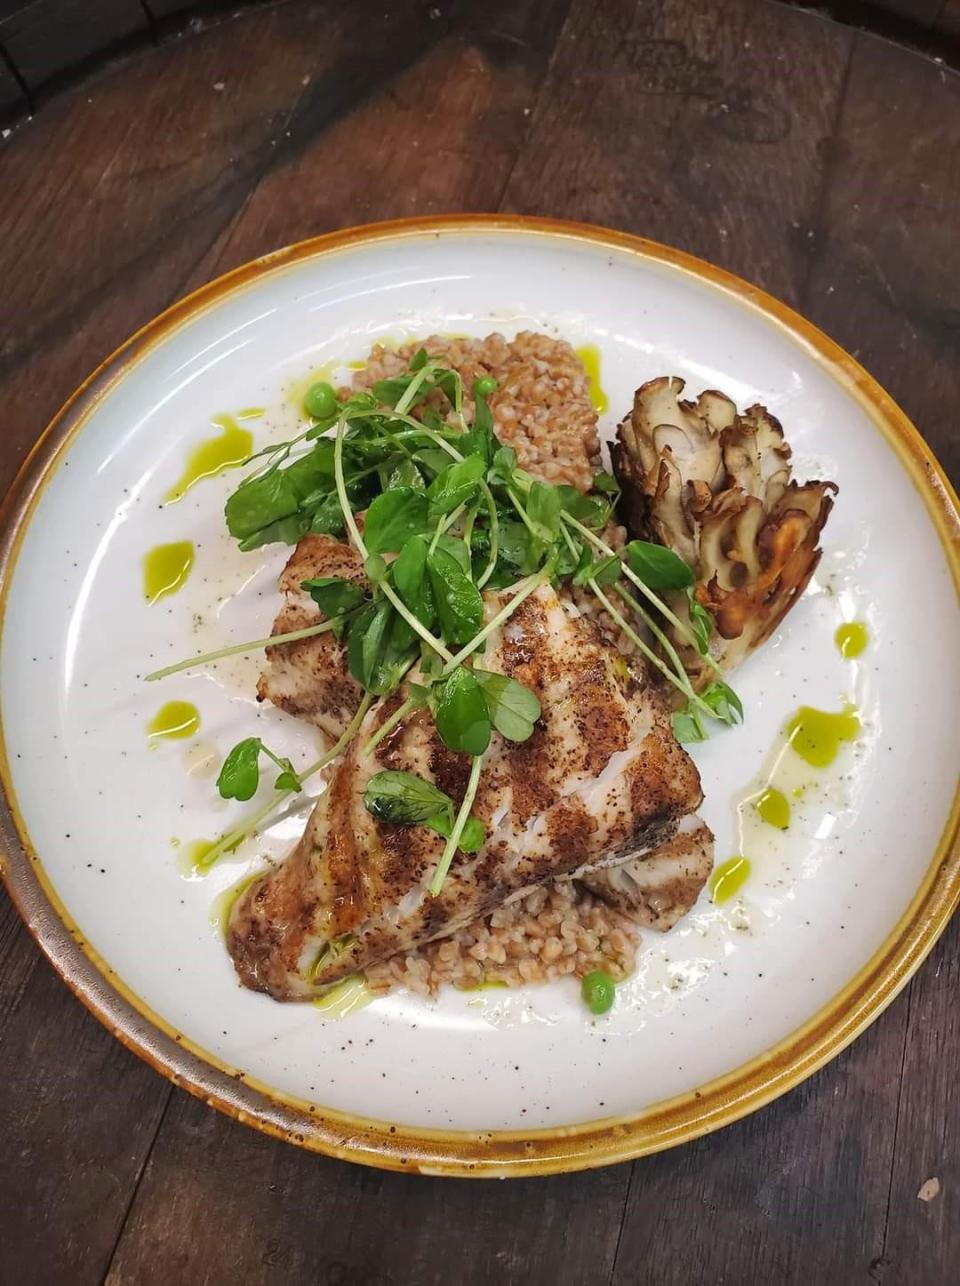 Vesta Wood-Fired's dish of walleye, created by its chef, Christine Nunn, with English peas, toasted farro risotto with a pea tendril salad and candied lemon vinaigrette.